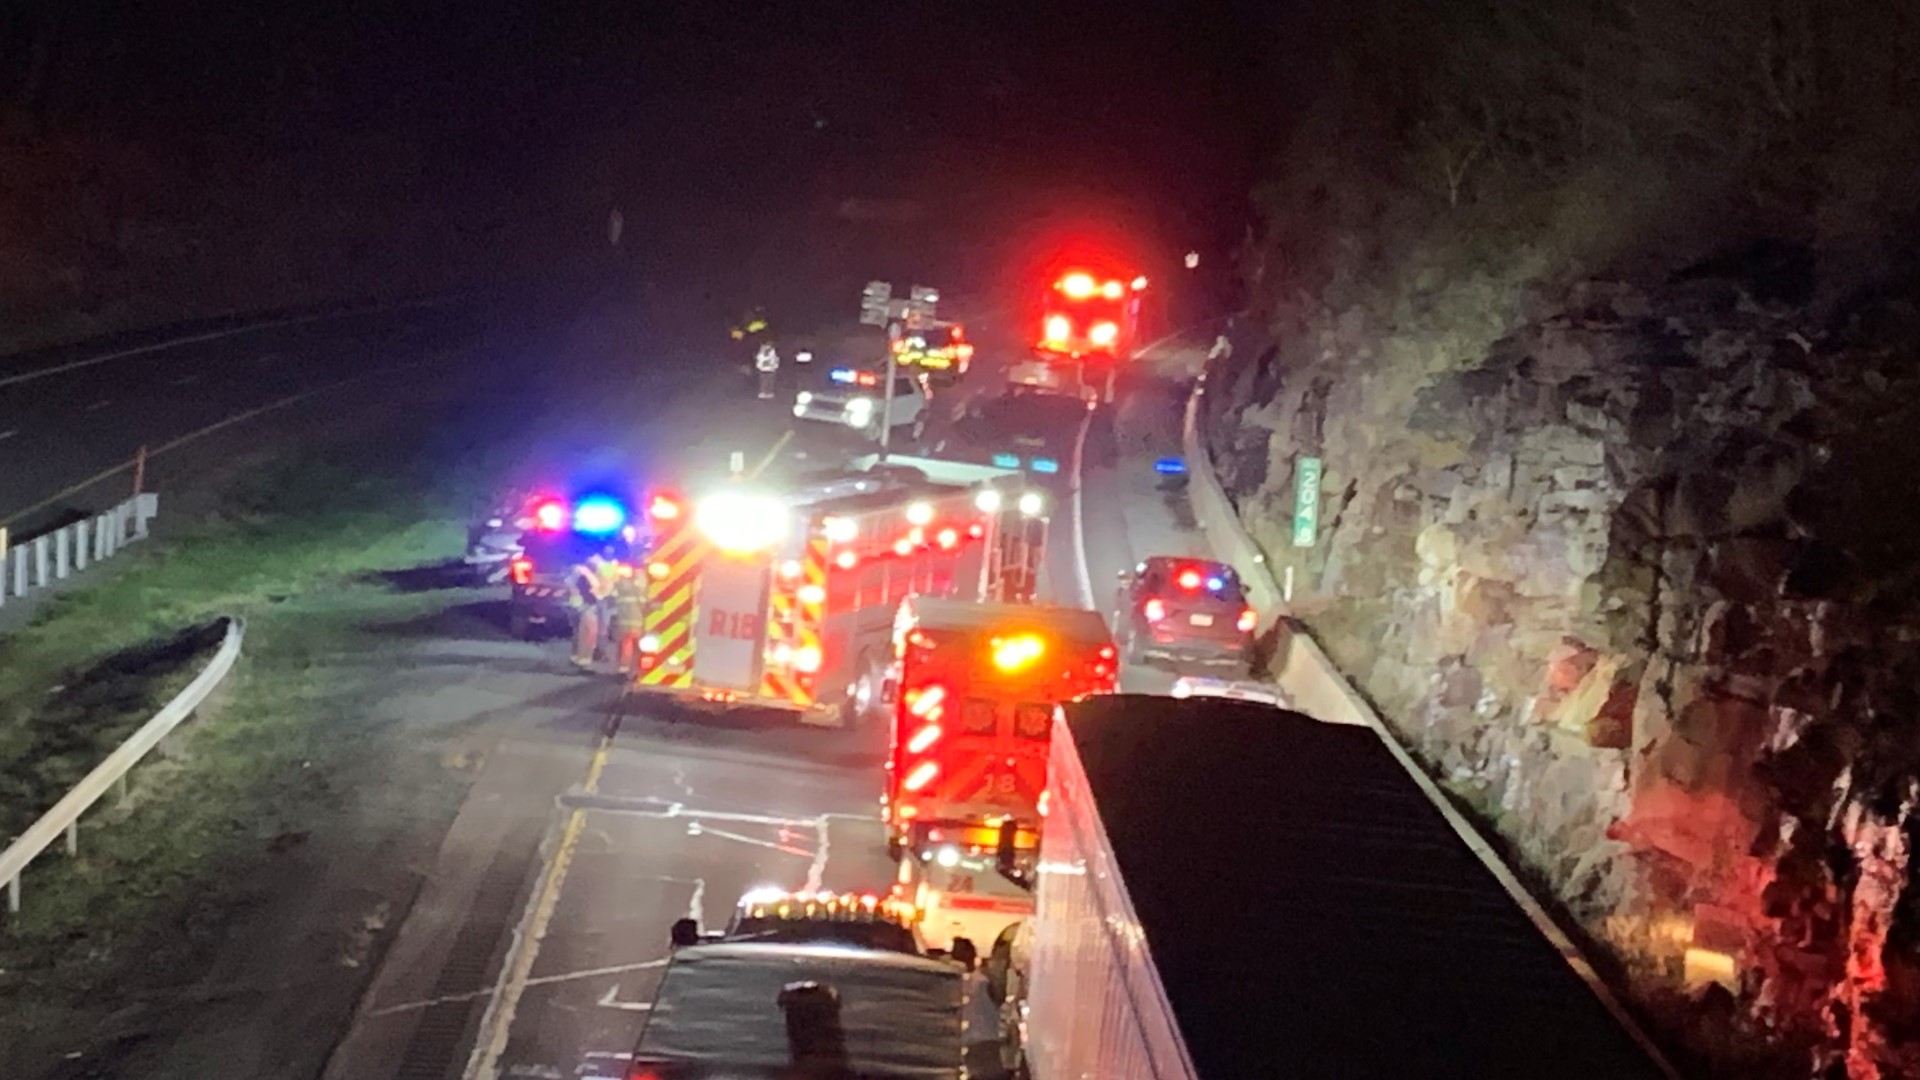 All lanes were closed on Interstate 81 South around 9 p.m. on Saturday.